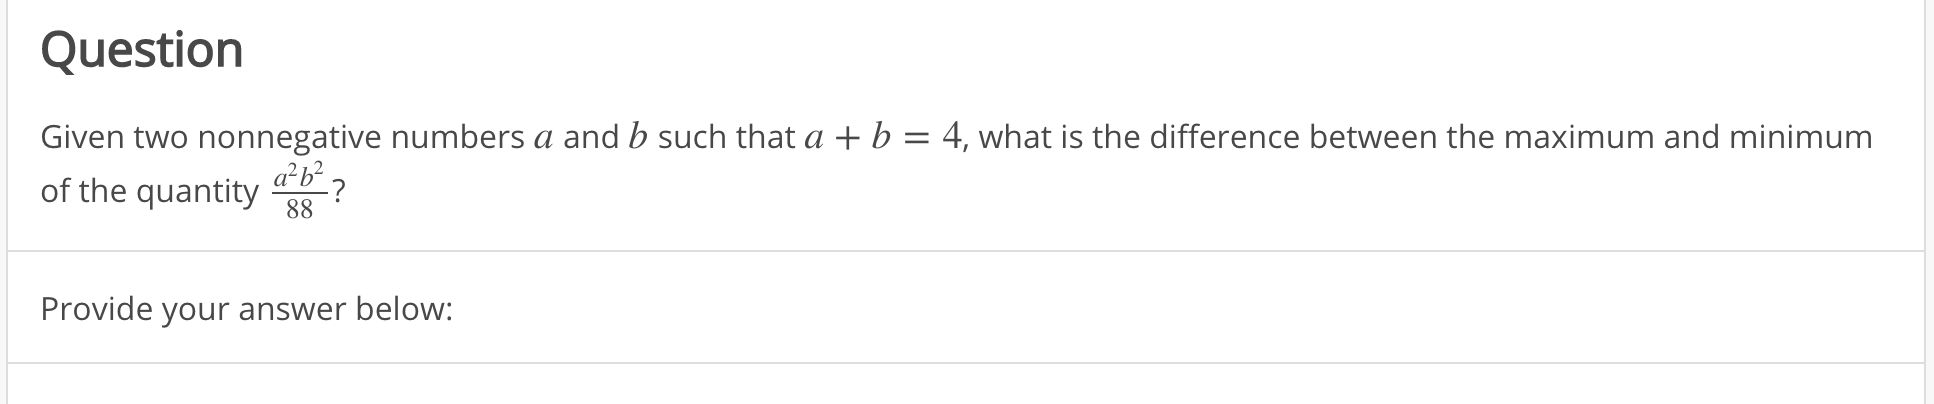 Given two nonnegative numbers a and b such that a + b = 4, what is the difference between the maximum and minimum
ab?
of the quantity
88
Provide your answer below:
